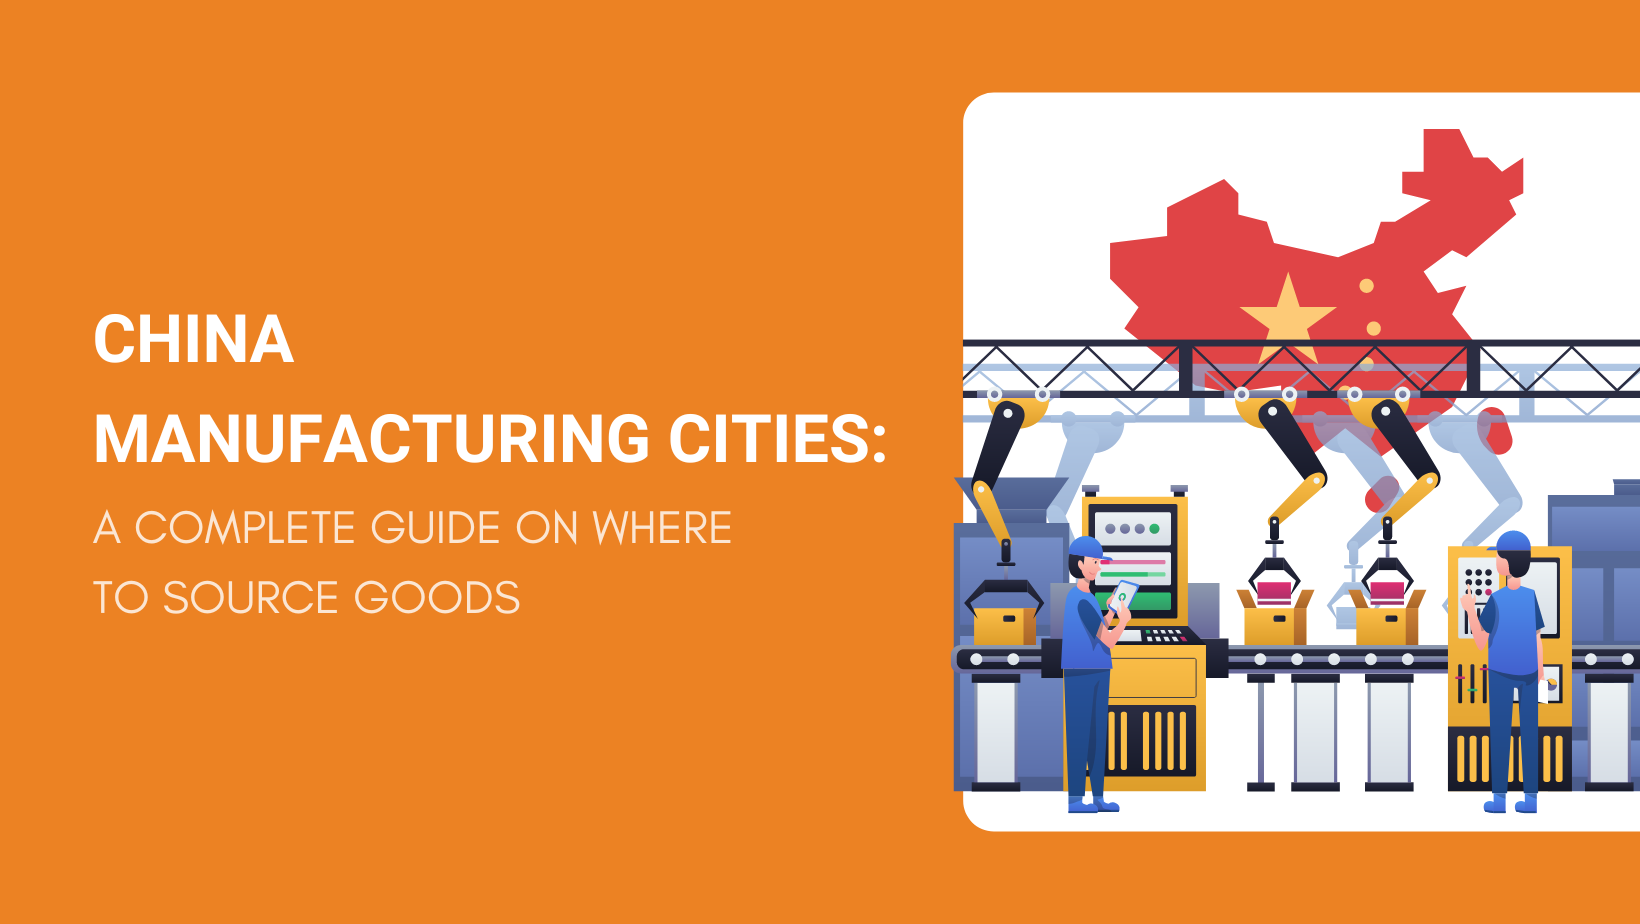 https://cdn.nichedropshipping.com/wp-content/uploads/2022/06/CHINA-MANUFACTURING-CITIES-A-COMPLETE-GUIDE-ON-WHERE-TO-SOURCE-GOODS.png